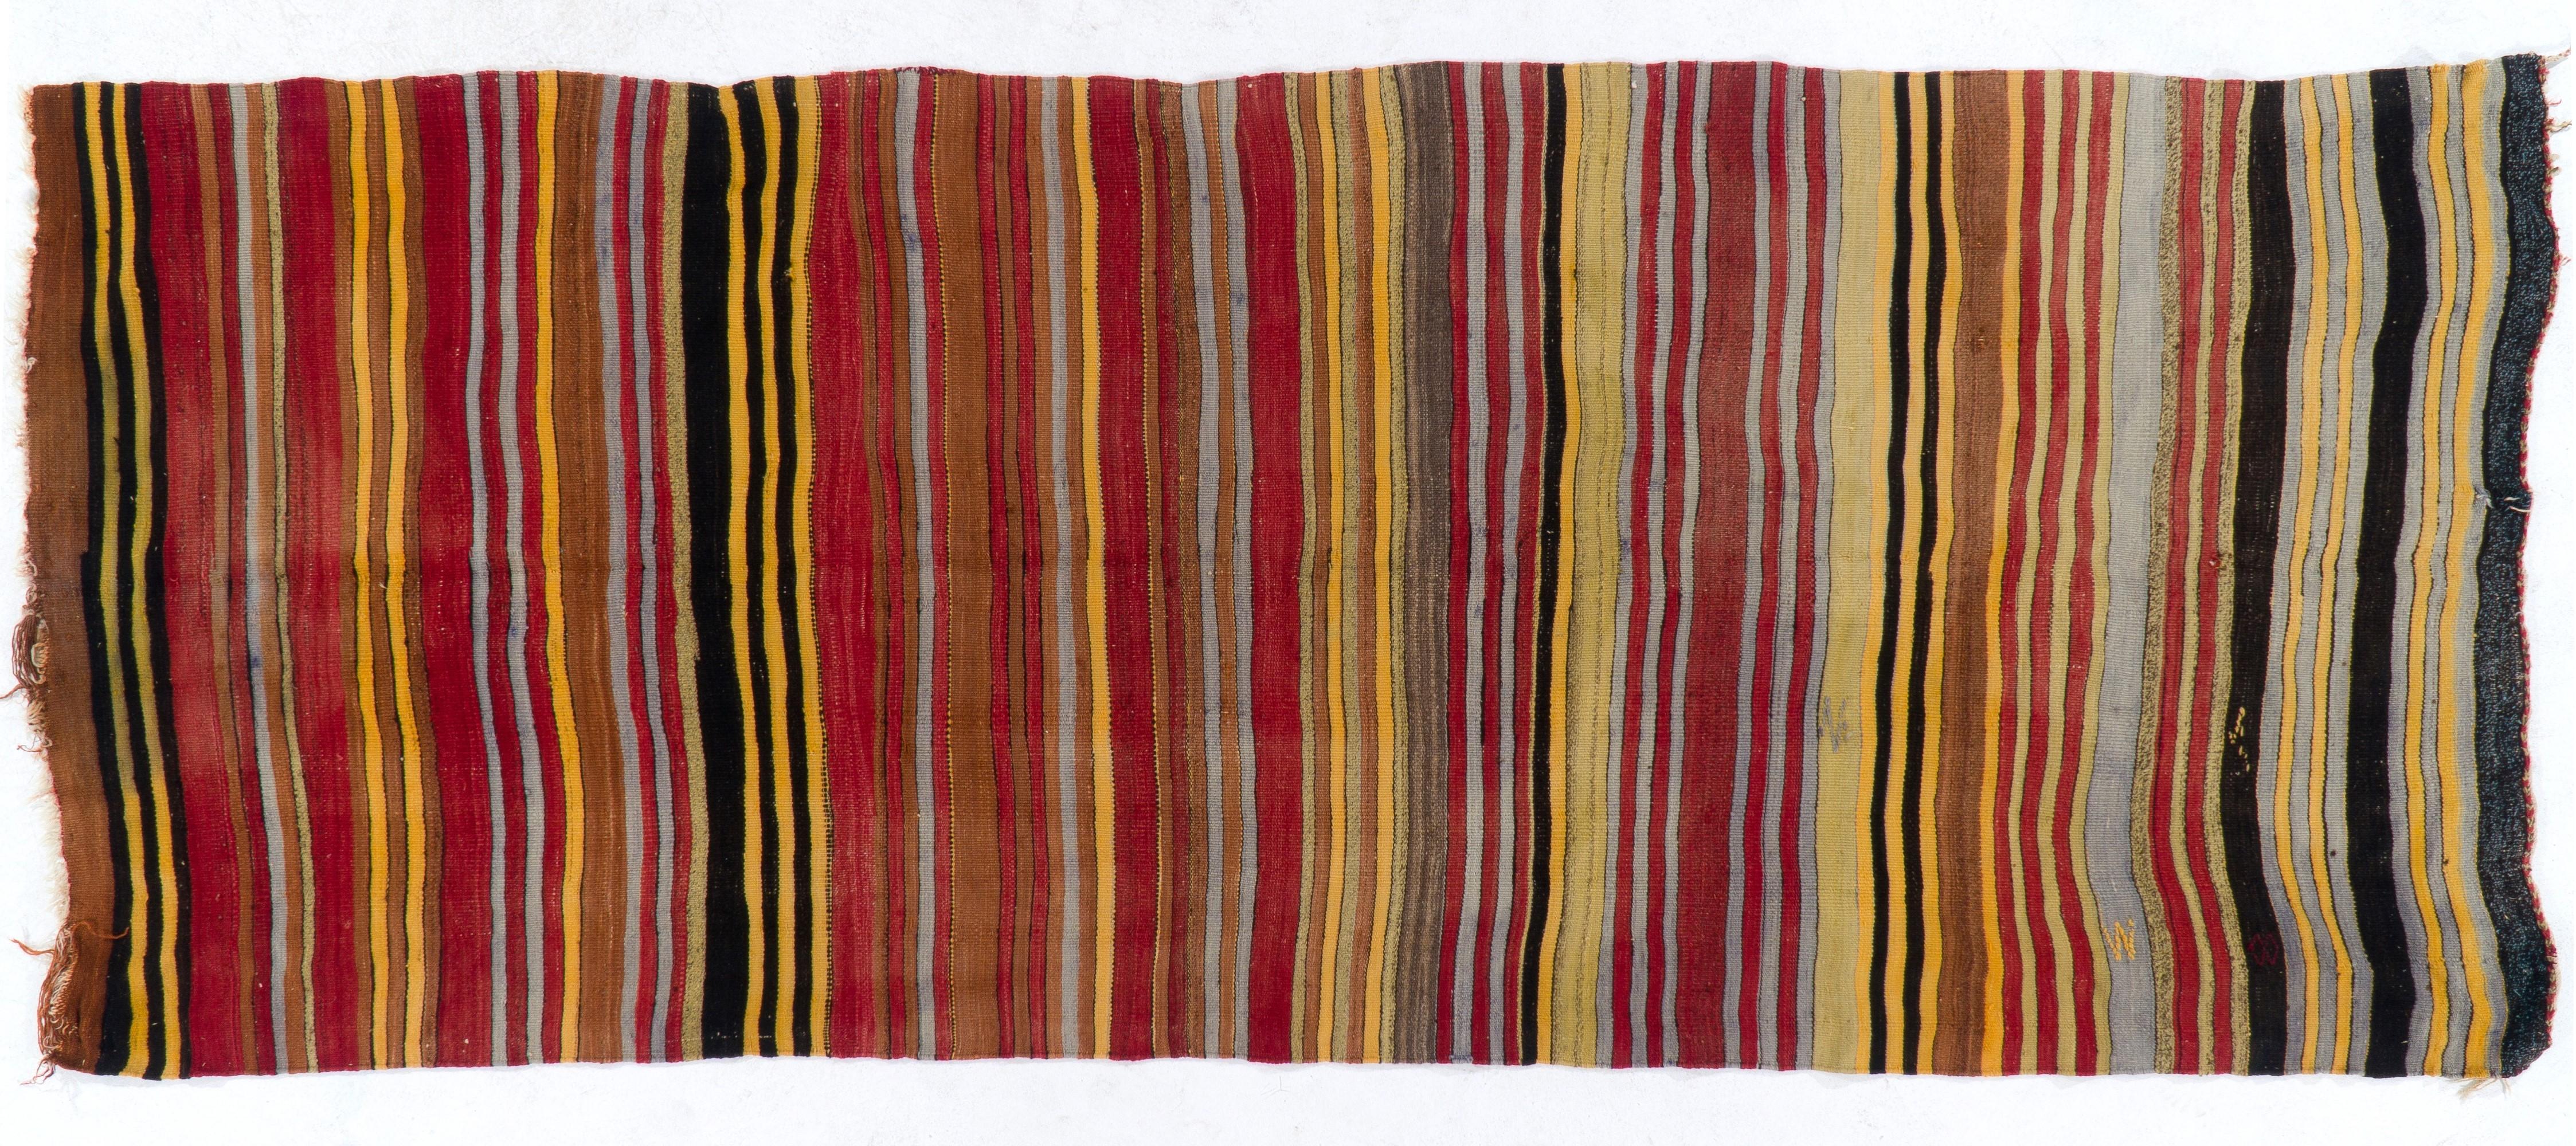 Hand-Woven 4.6x11.2 Ft Colorful Vintage Striped Handwoven Turkish Kilim 'Flat Weave' For Sale